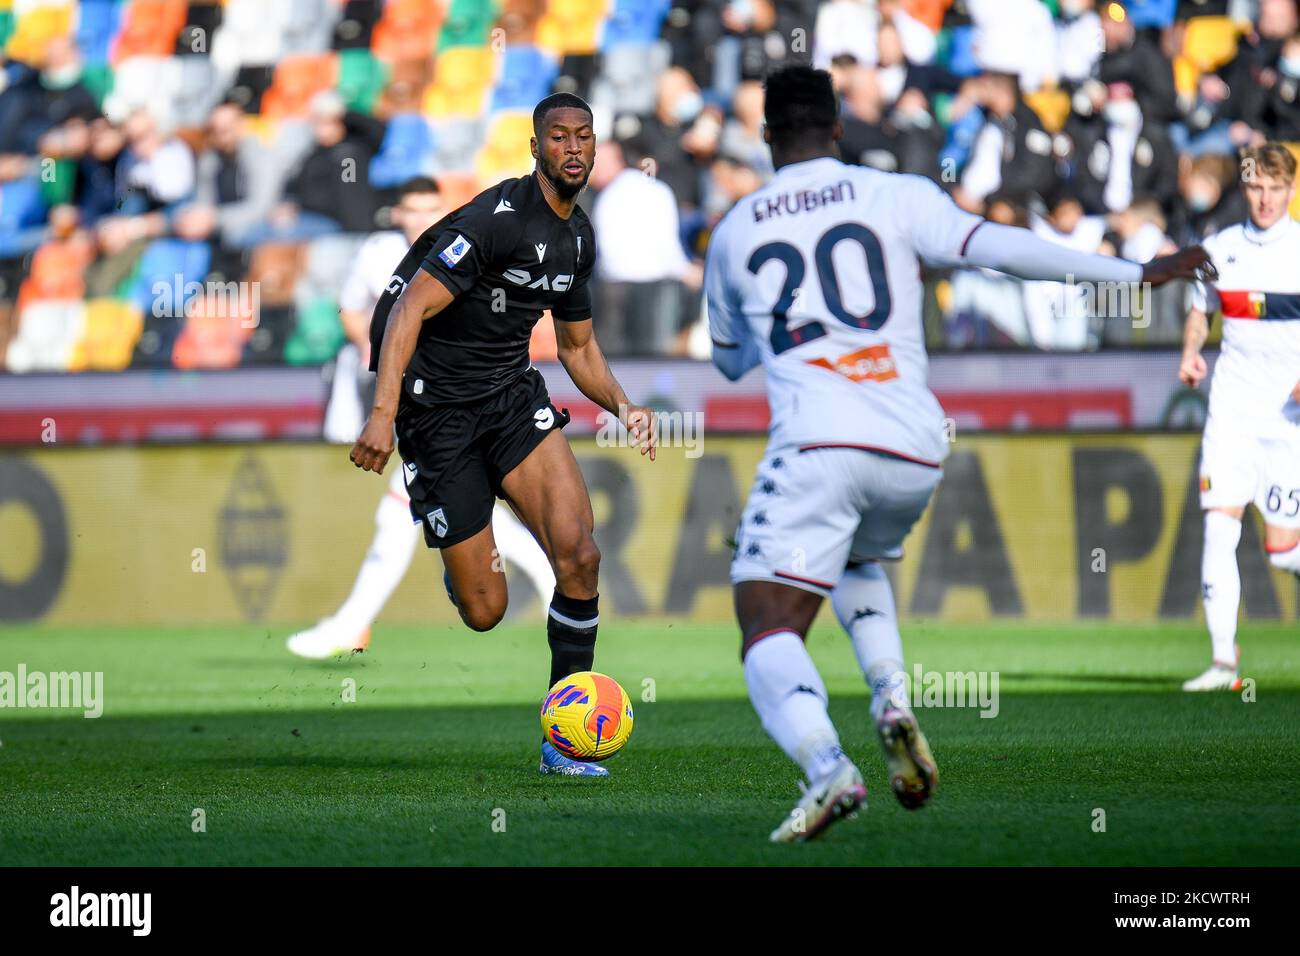 Norberto Bercique Gomes Betuncal (Udinese) carries the ball during the italian soccer Serie A match Udinese Calcio vs Genoa CFC on November 28, 2021 at the Friuli - Dacia Arena stadium in Udine, Italy (Photo by Ettore Griffoni/LiveMedia/NurPhoto) Stock Photo